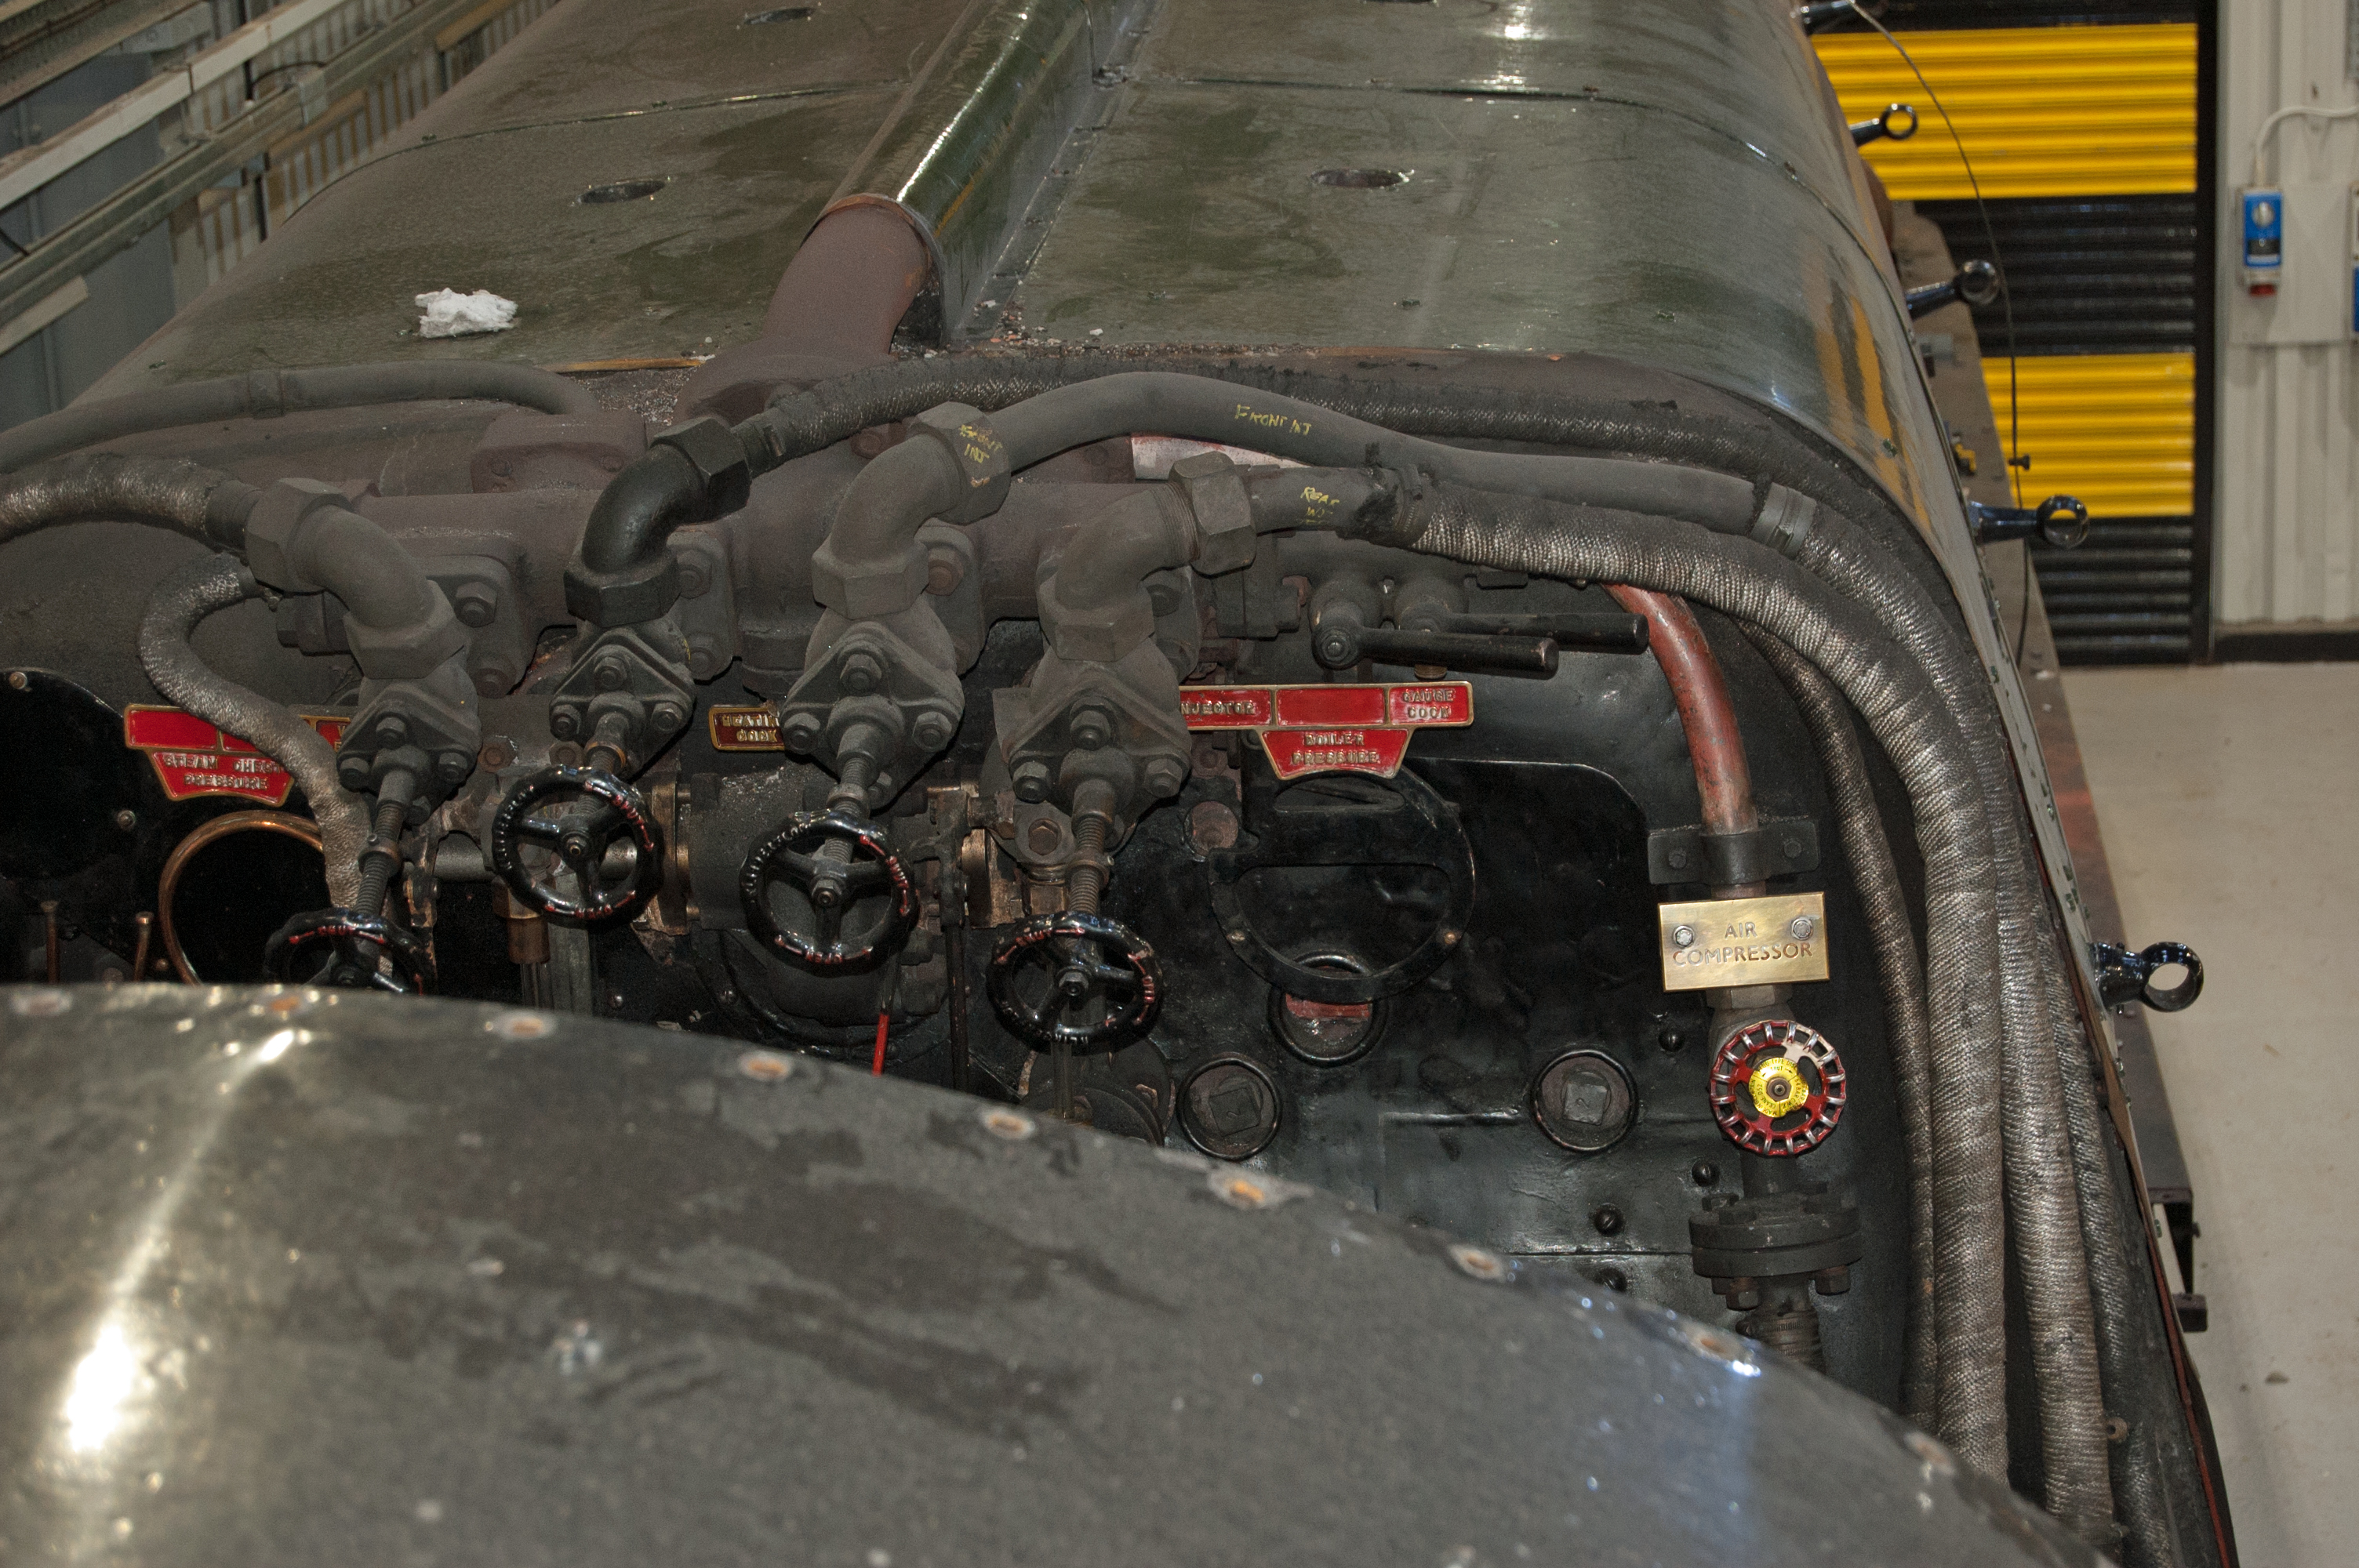 The cab and some of the fittings have been removed